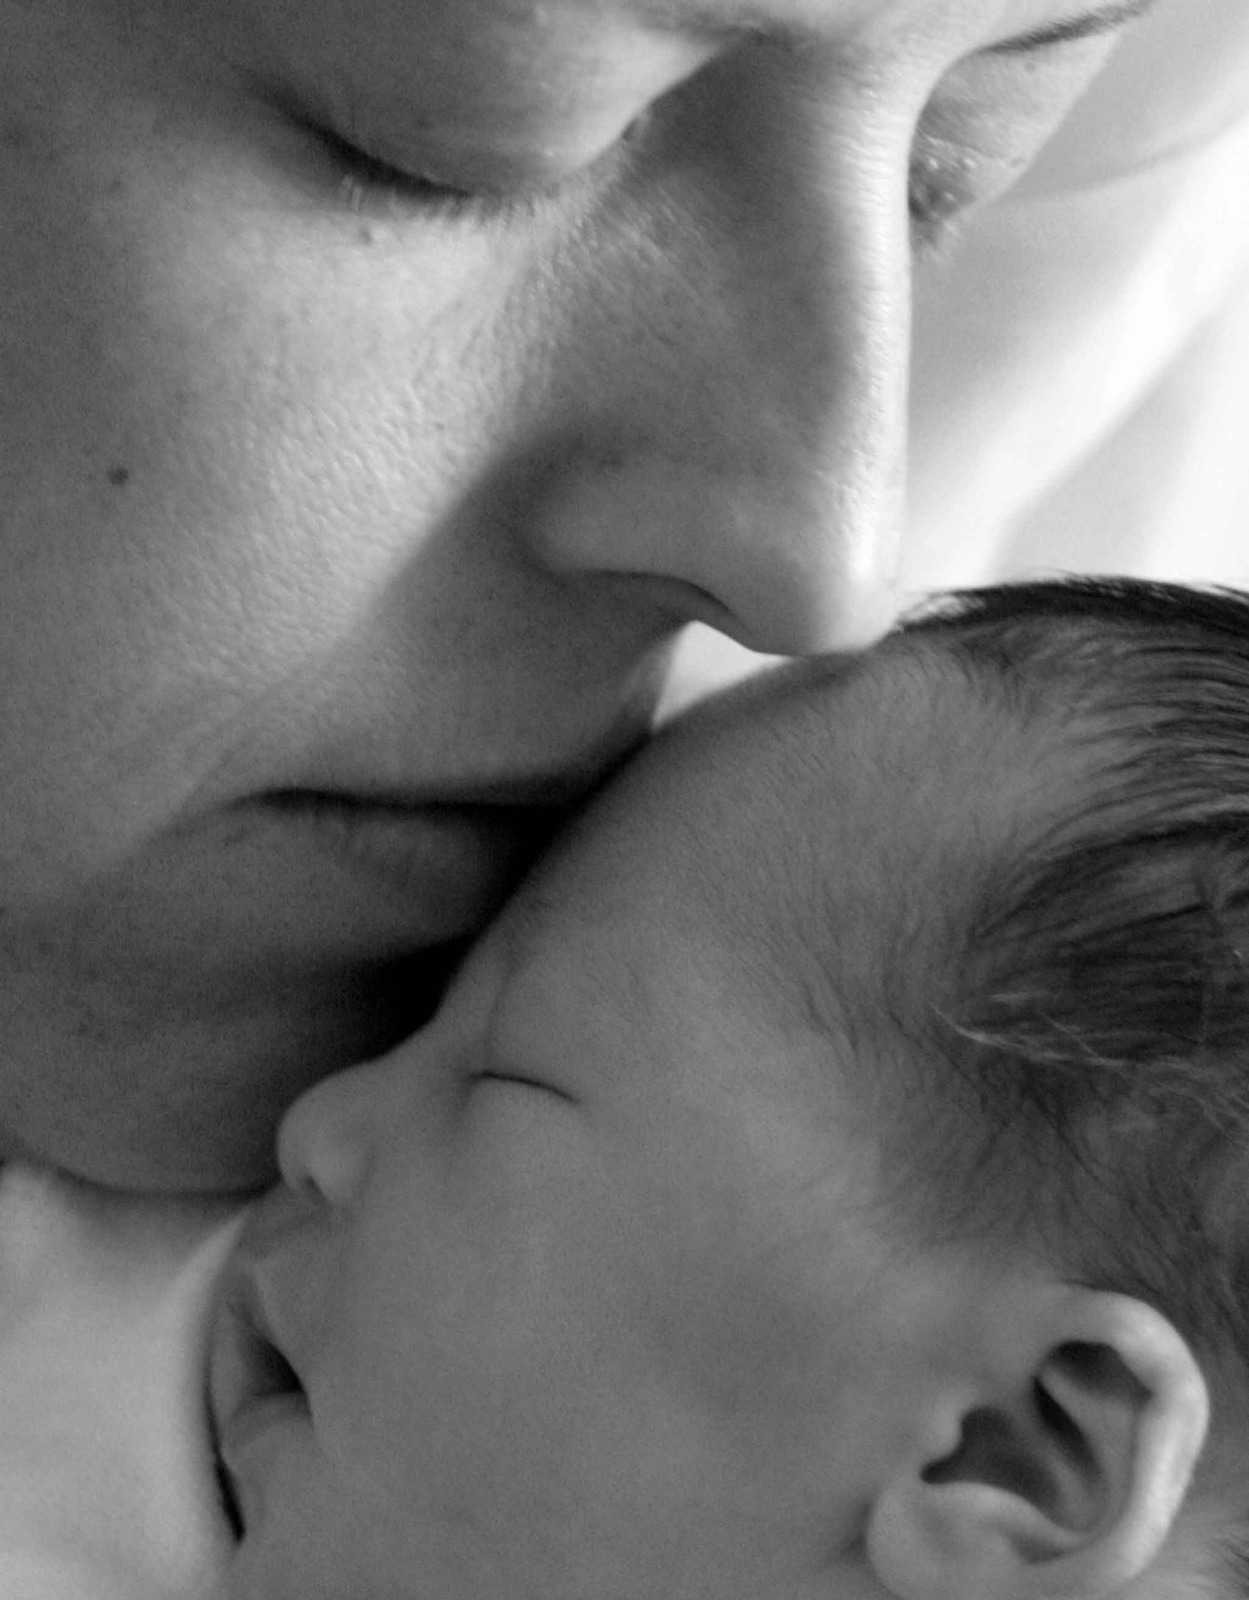 Breastfeeding Difficulties May Lead to Postpartum Depression - MGH